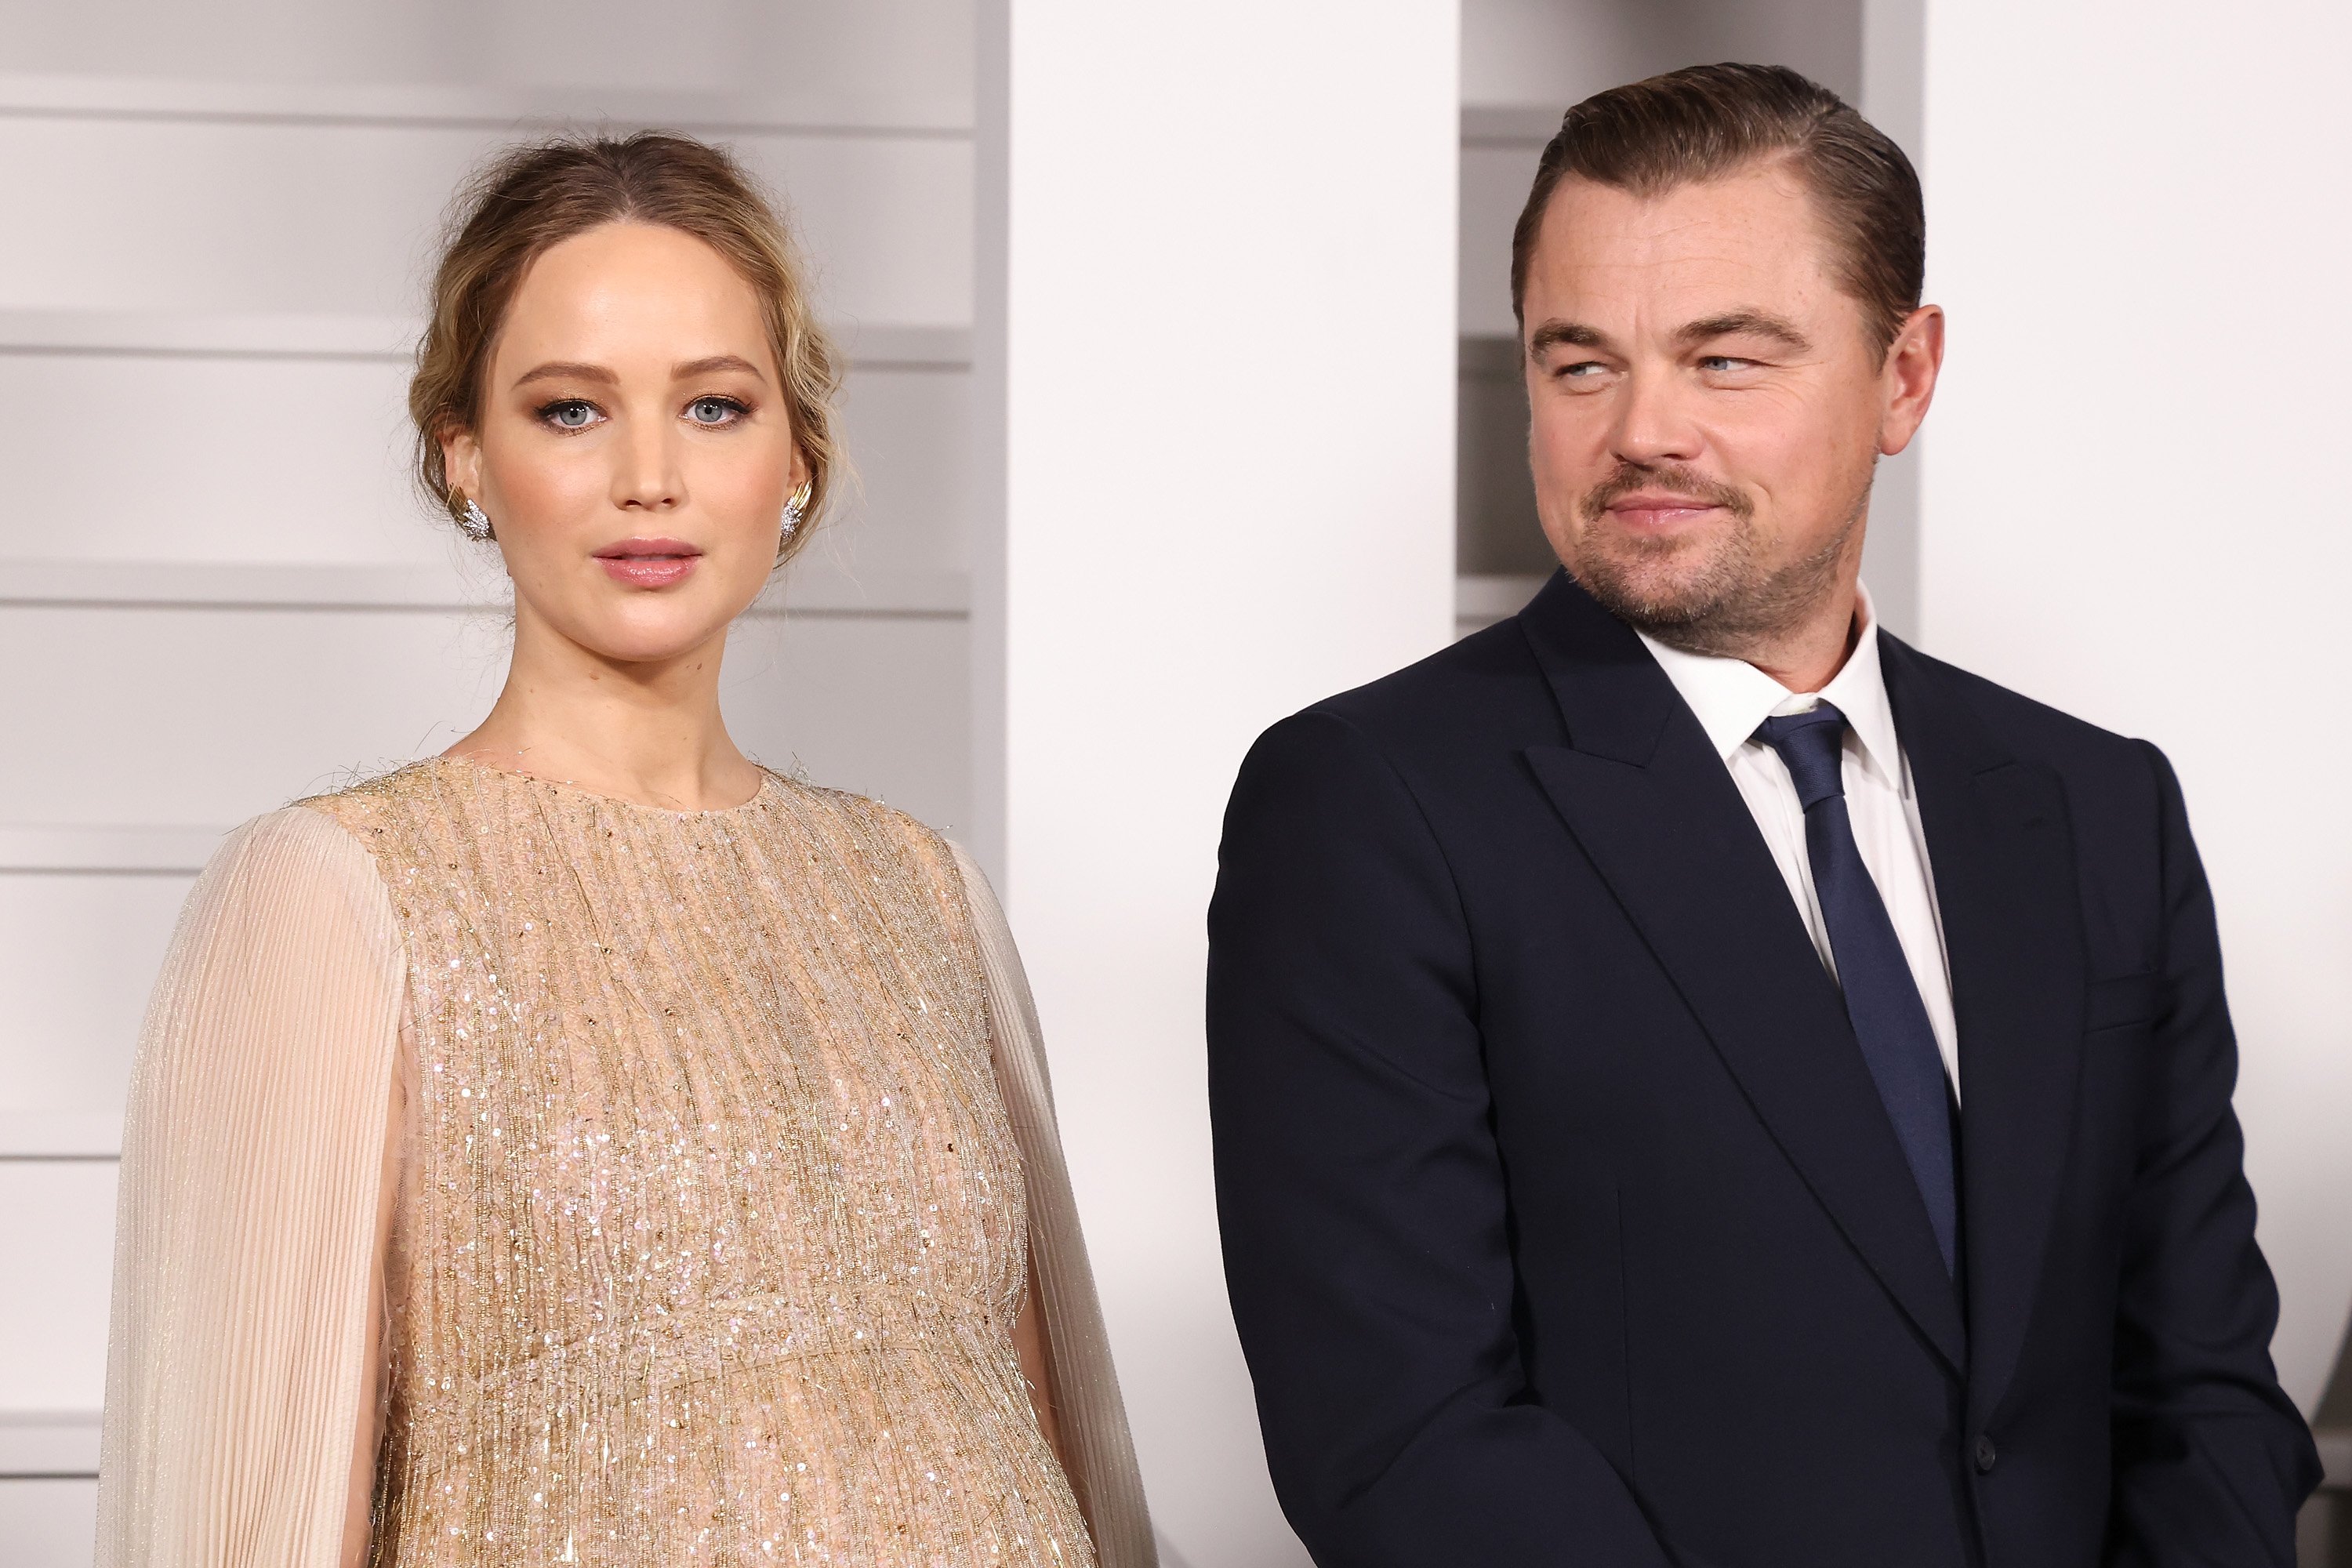 Jennifer Lawrence and Leonardo DiCaprio attend the world premier of Netflix's "Don't Look Up"  in New York | Source: Getty Images